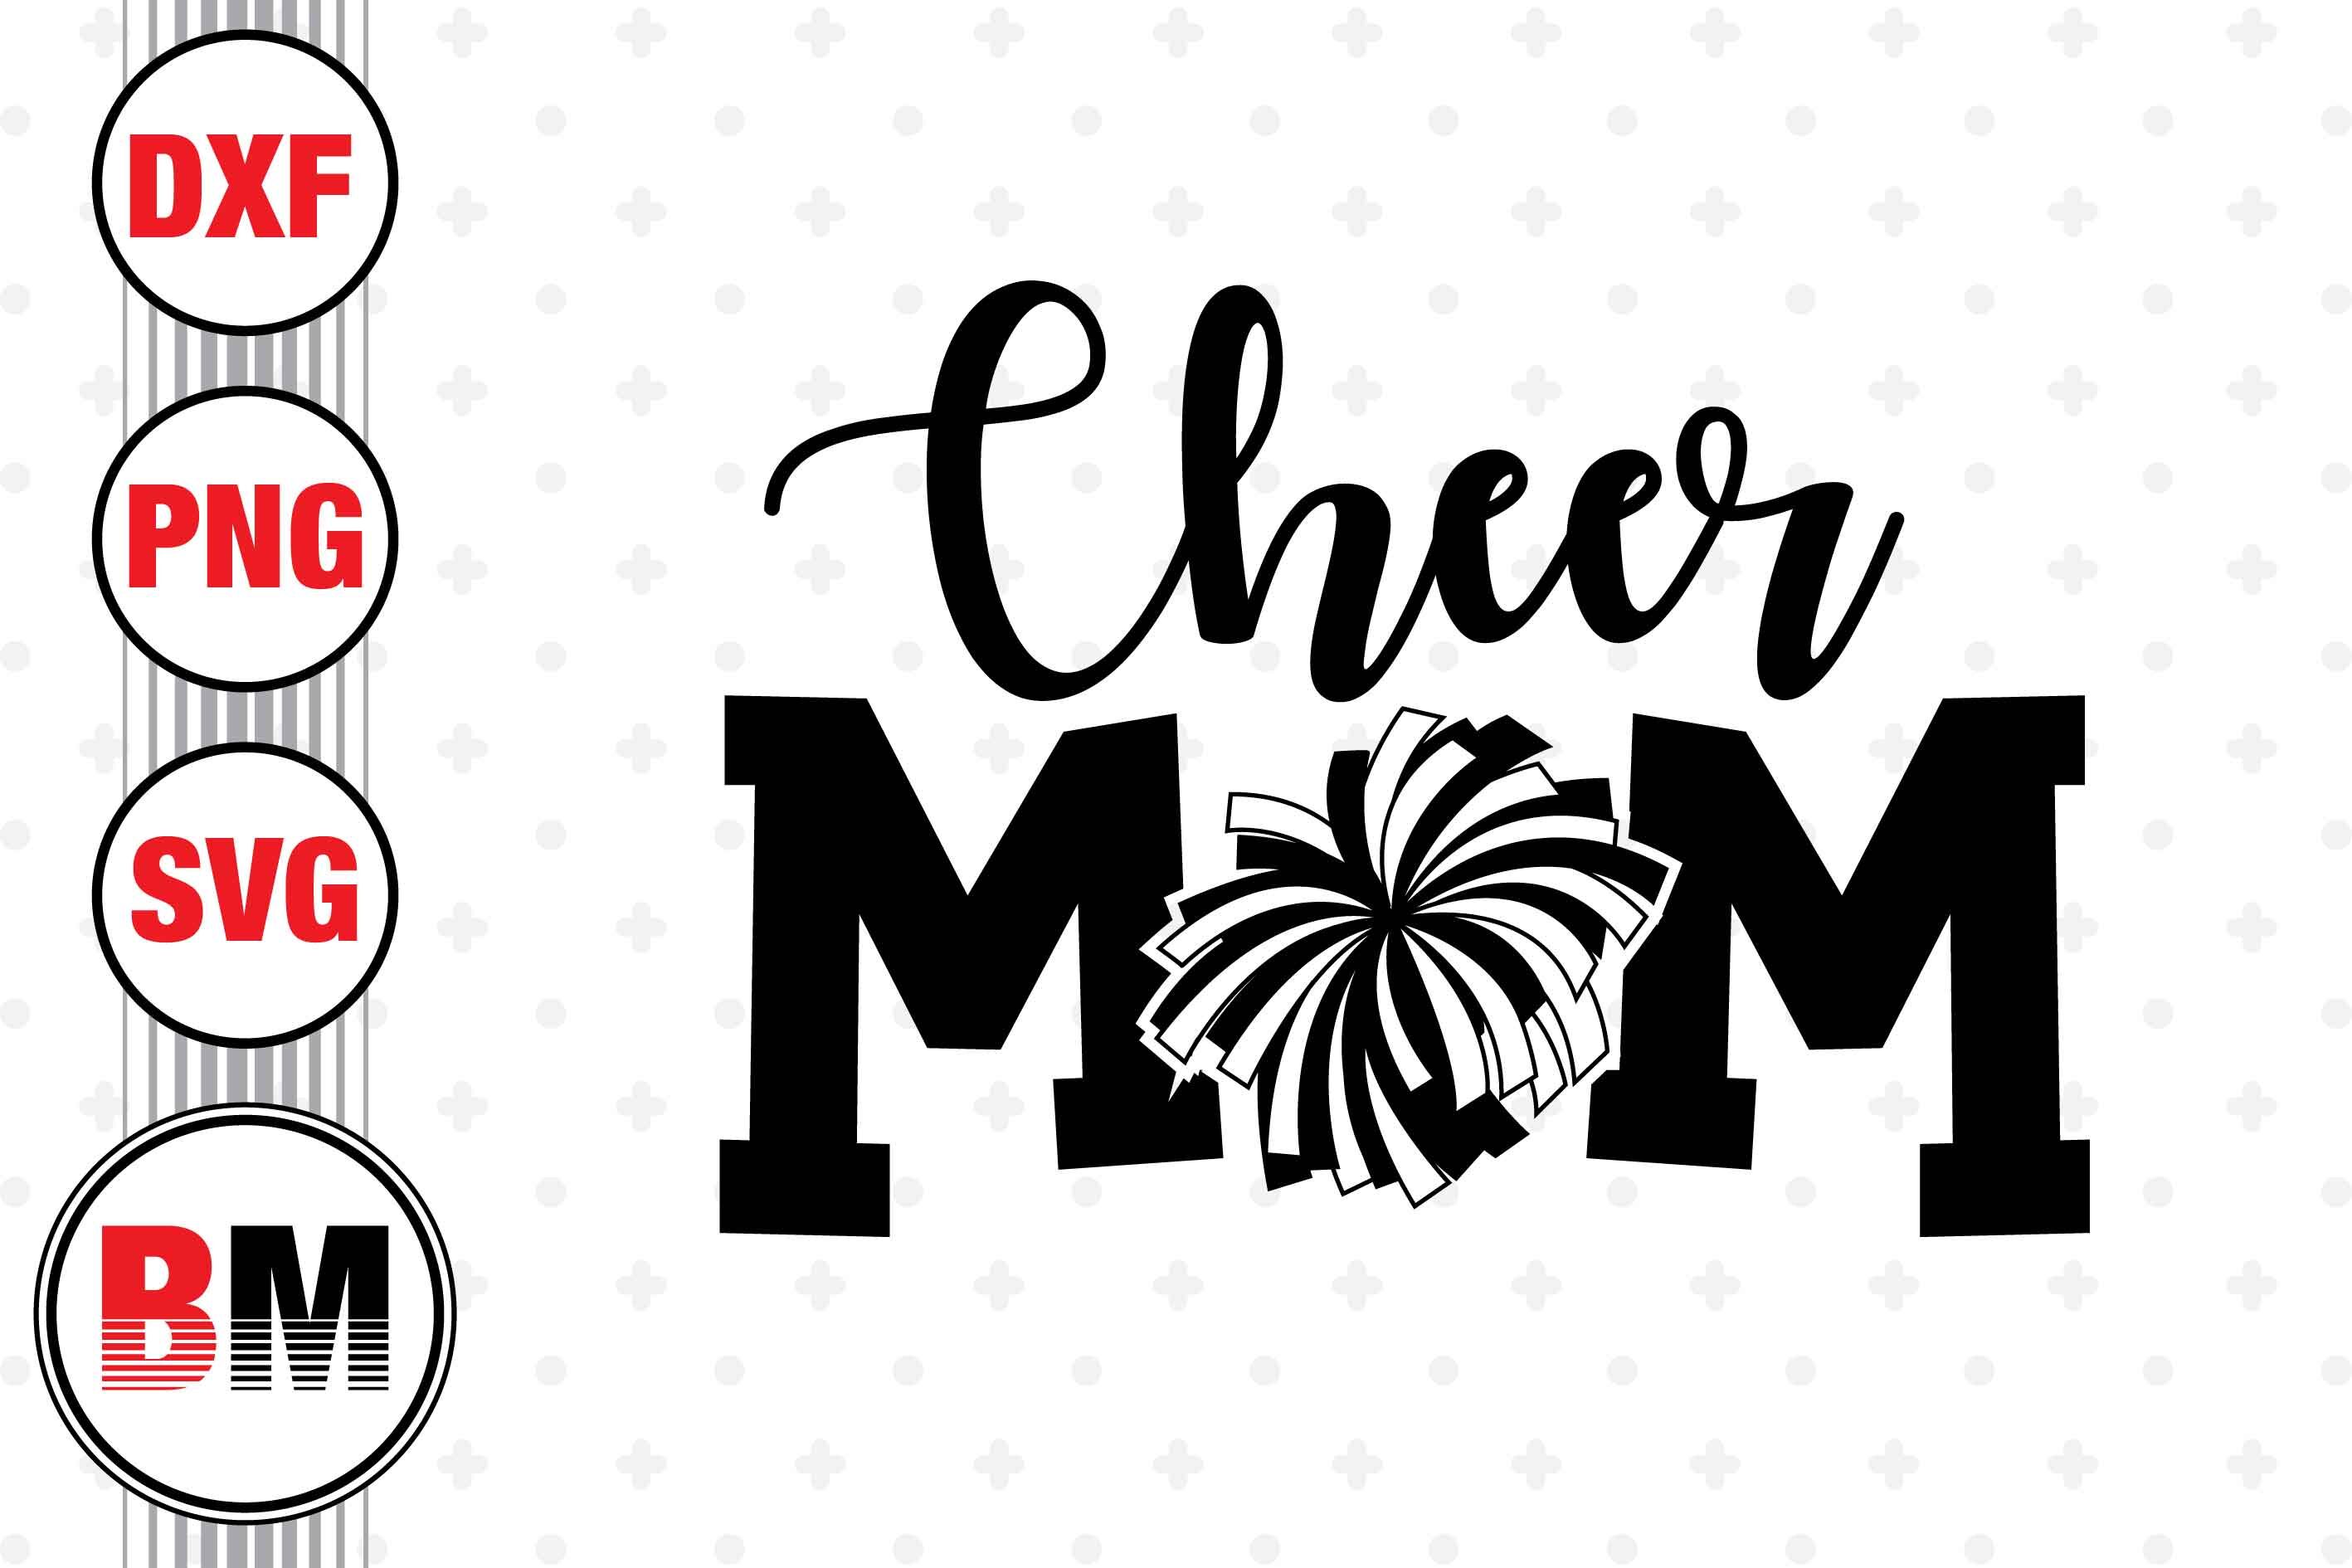 Cheer Mom SVG, PNG, DXF Files By Bmdesign | TheHungryJPEG